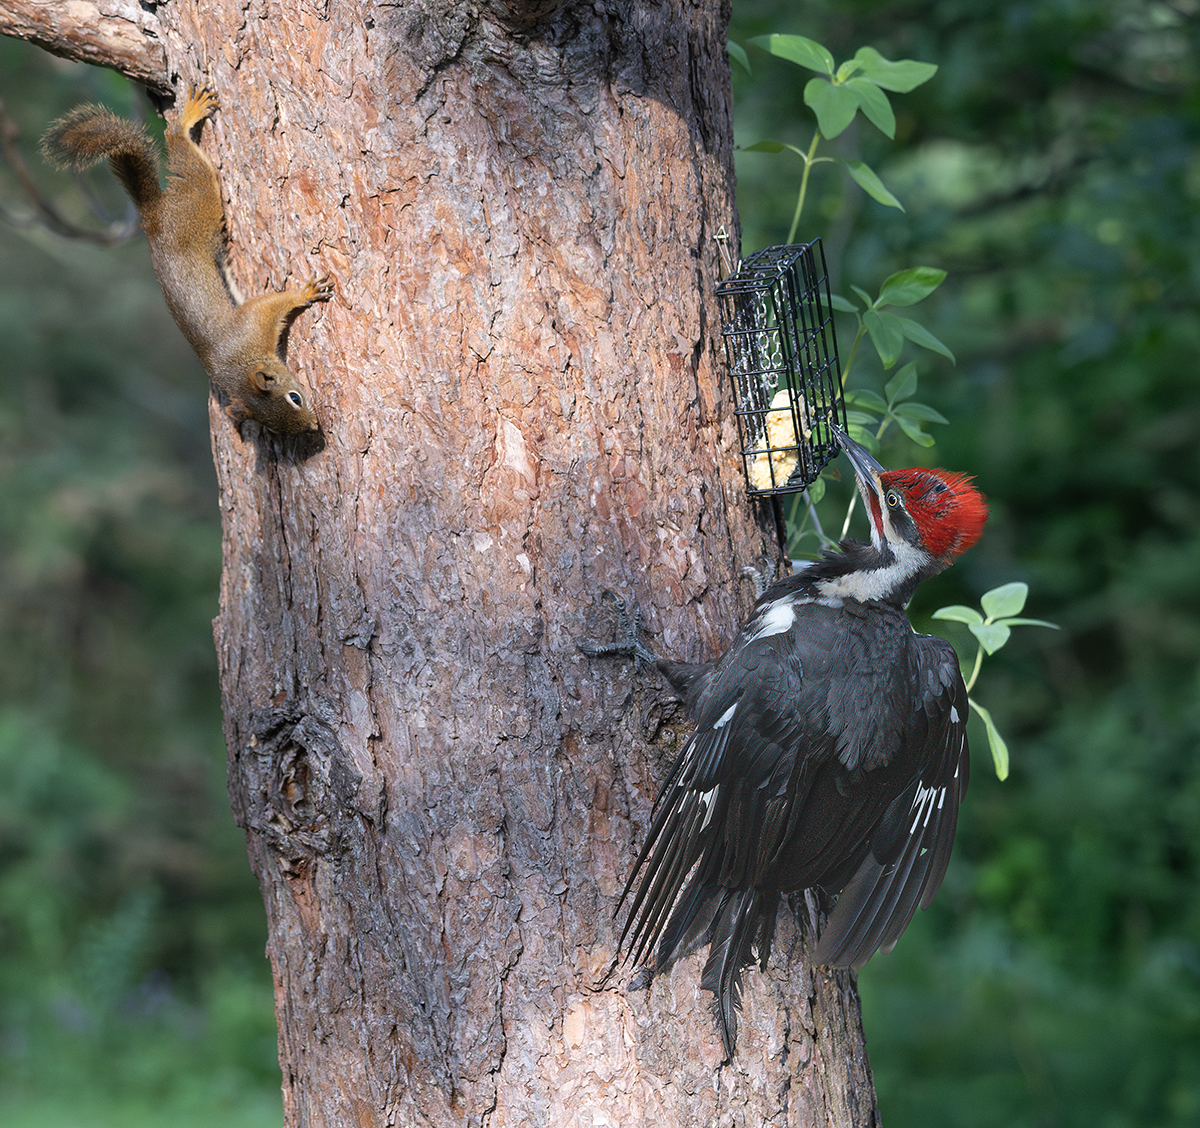 Pileated-squirrel confrontation 3536.jpg